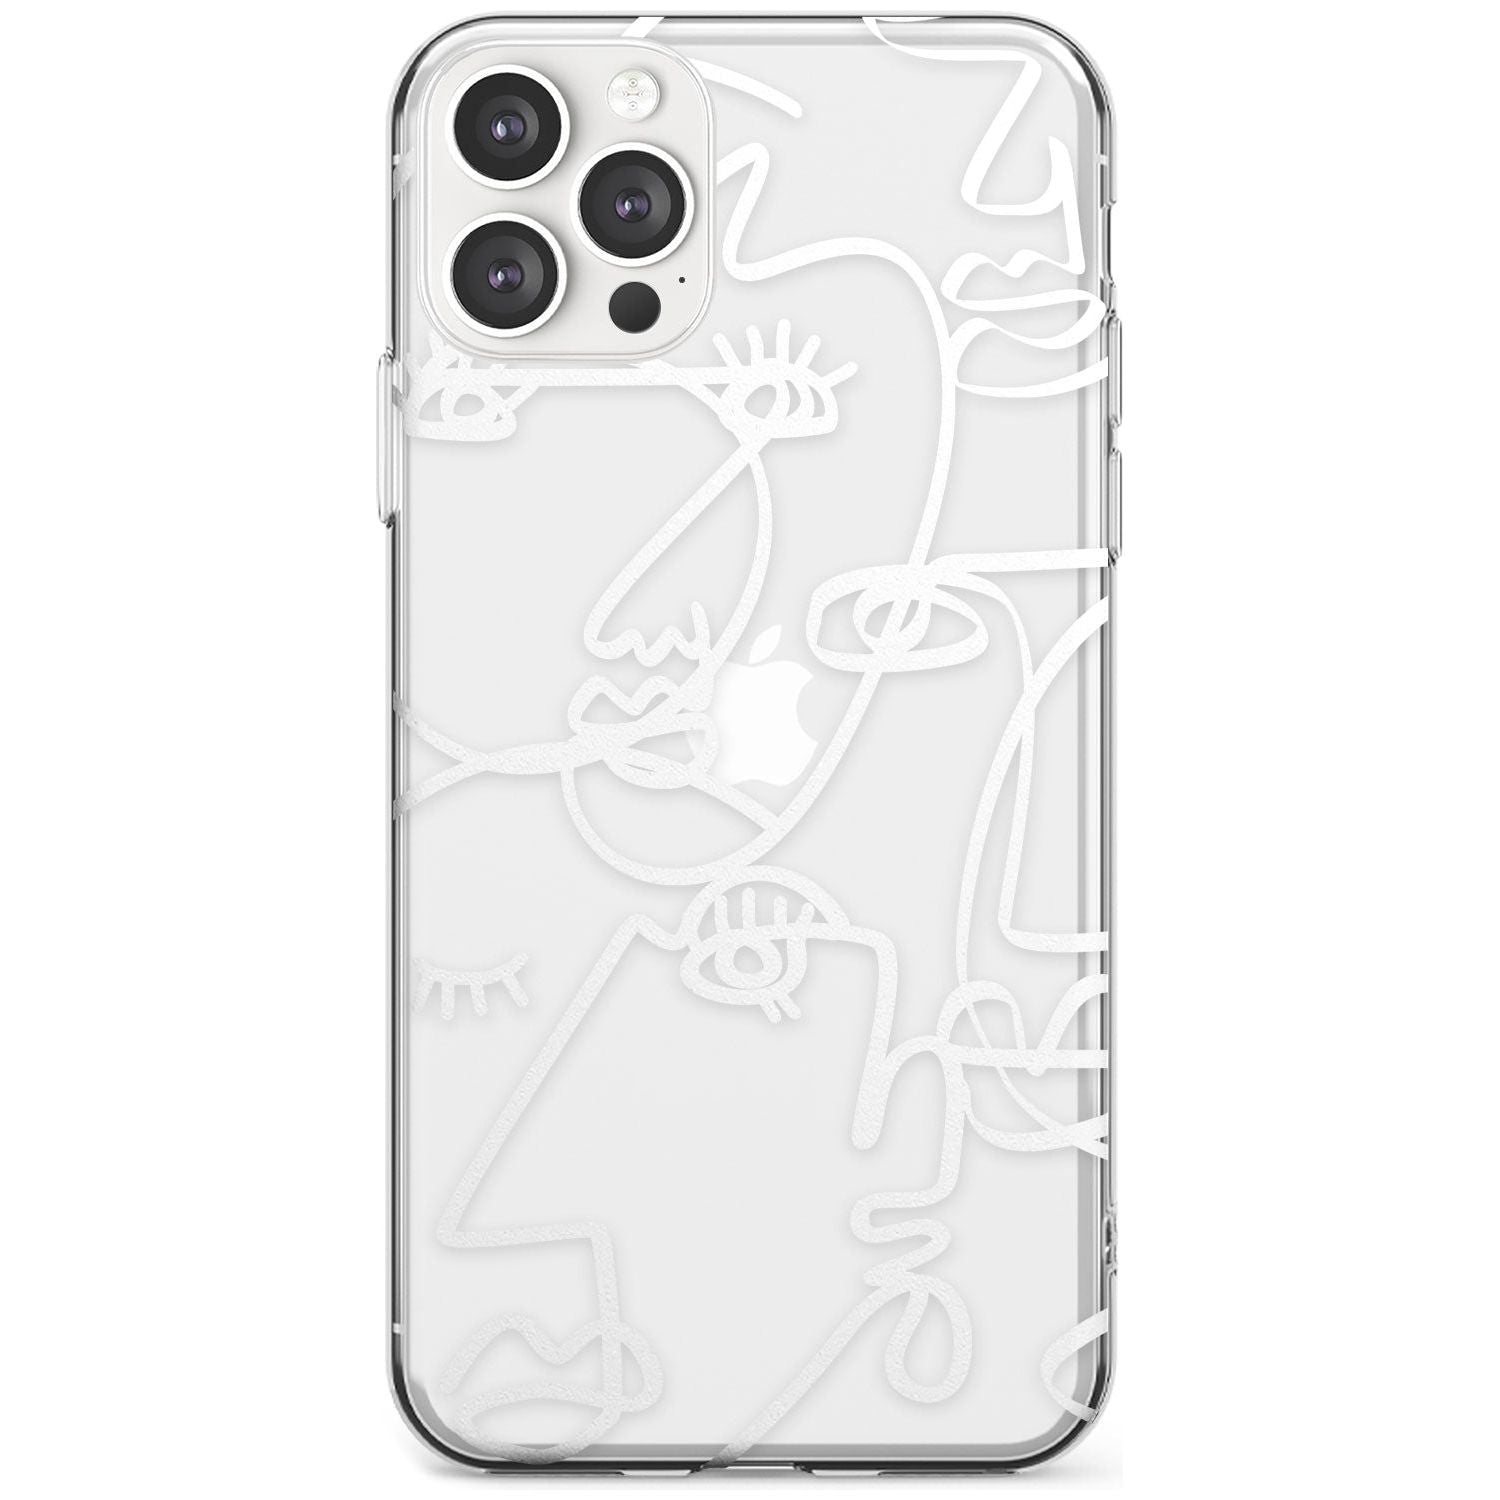 Continuous Line Faces: White on Clear Black Impact Phone Case for iPhone 11 Pro Max